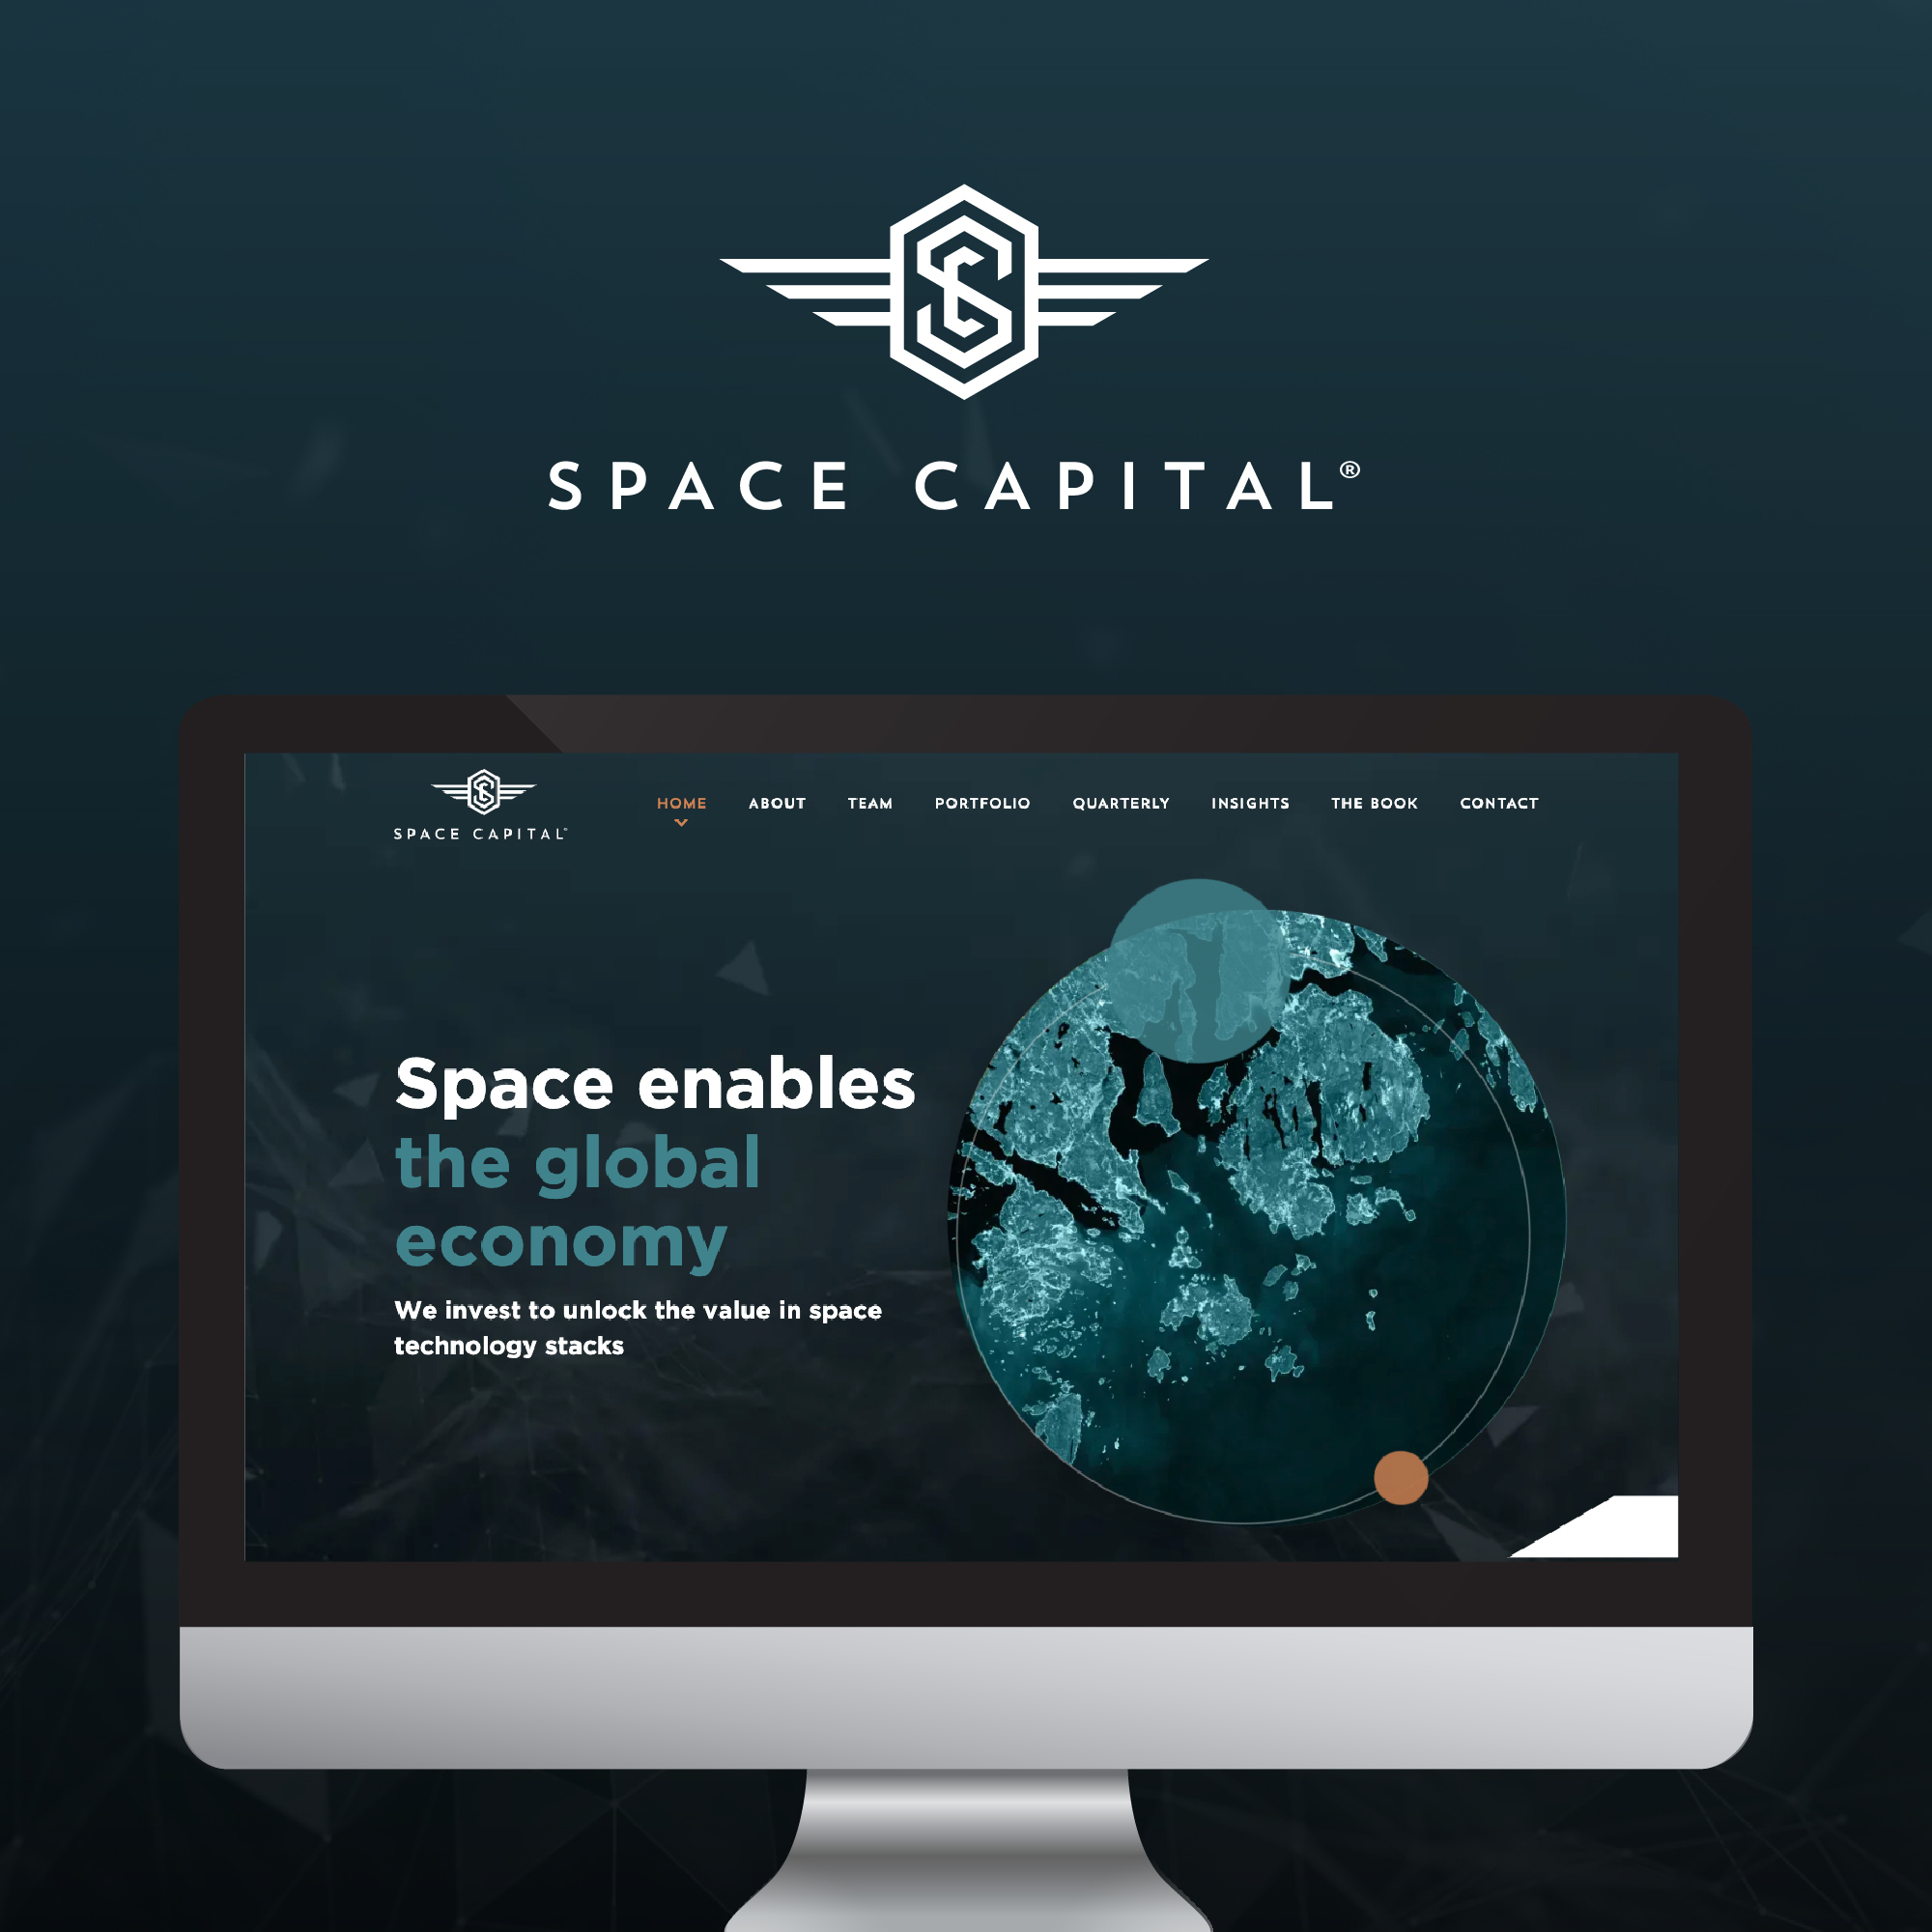 Space Capital's new home page - mockup of home page hero section is shown inside a desktop screen on a dark blue background with Space Capital's logo in white above the screen. The logo has the letter S and C inside wings, representing a rocket with wings.